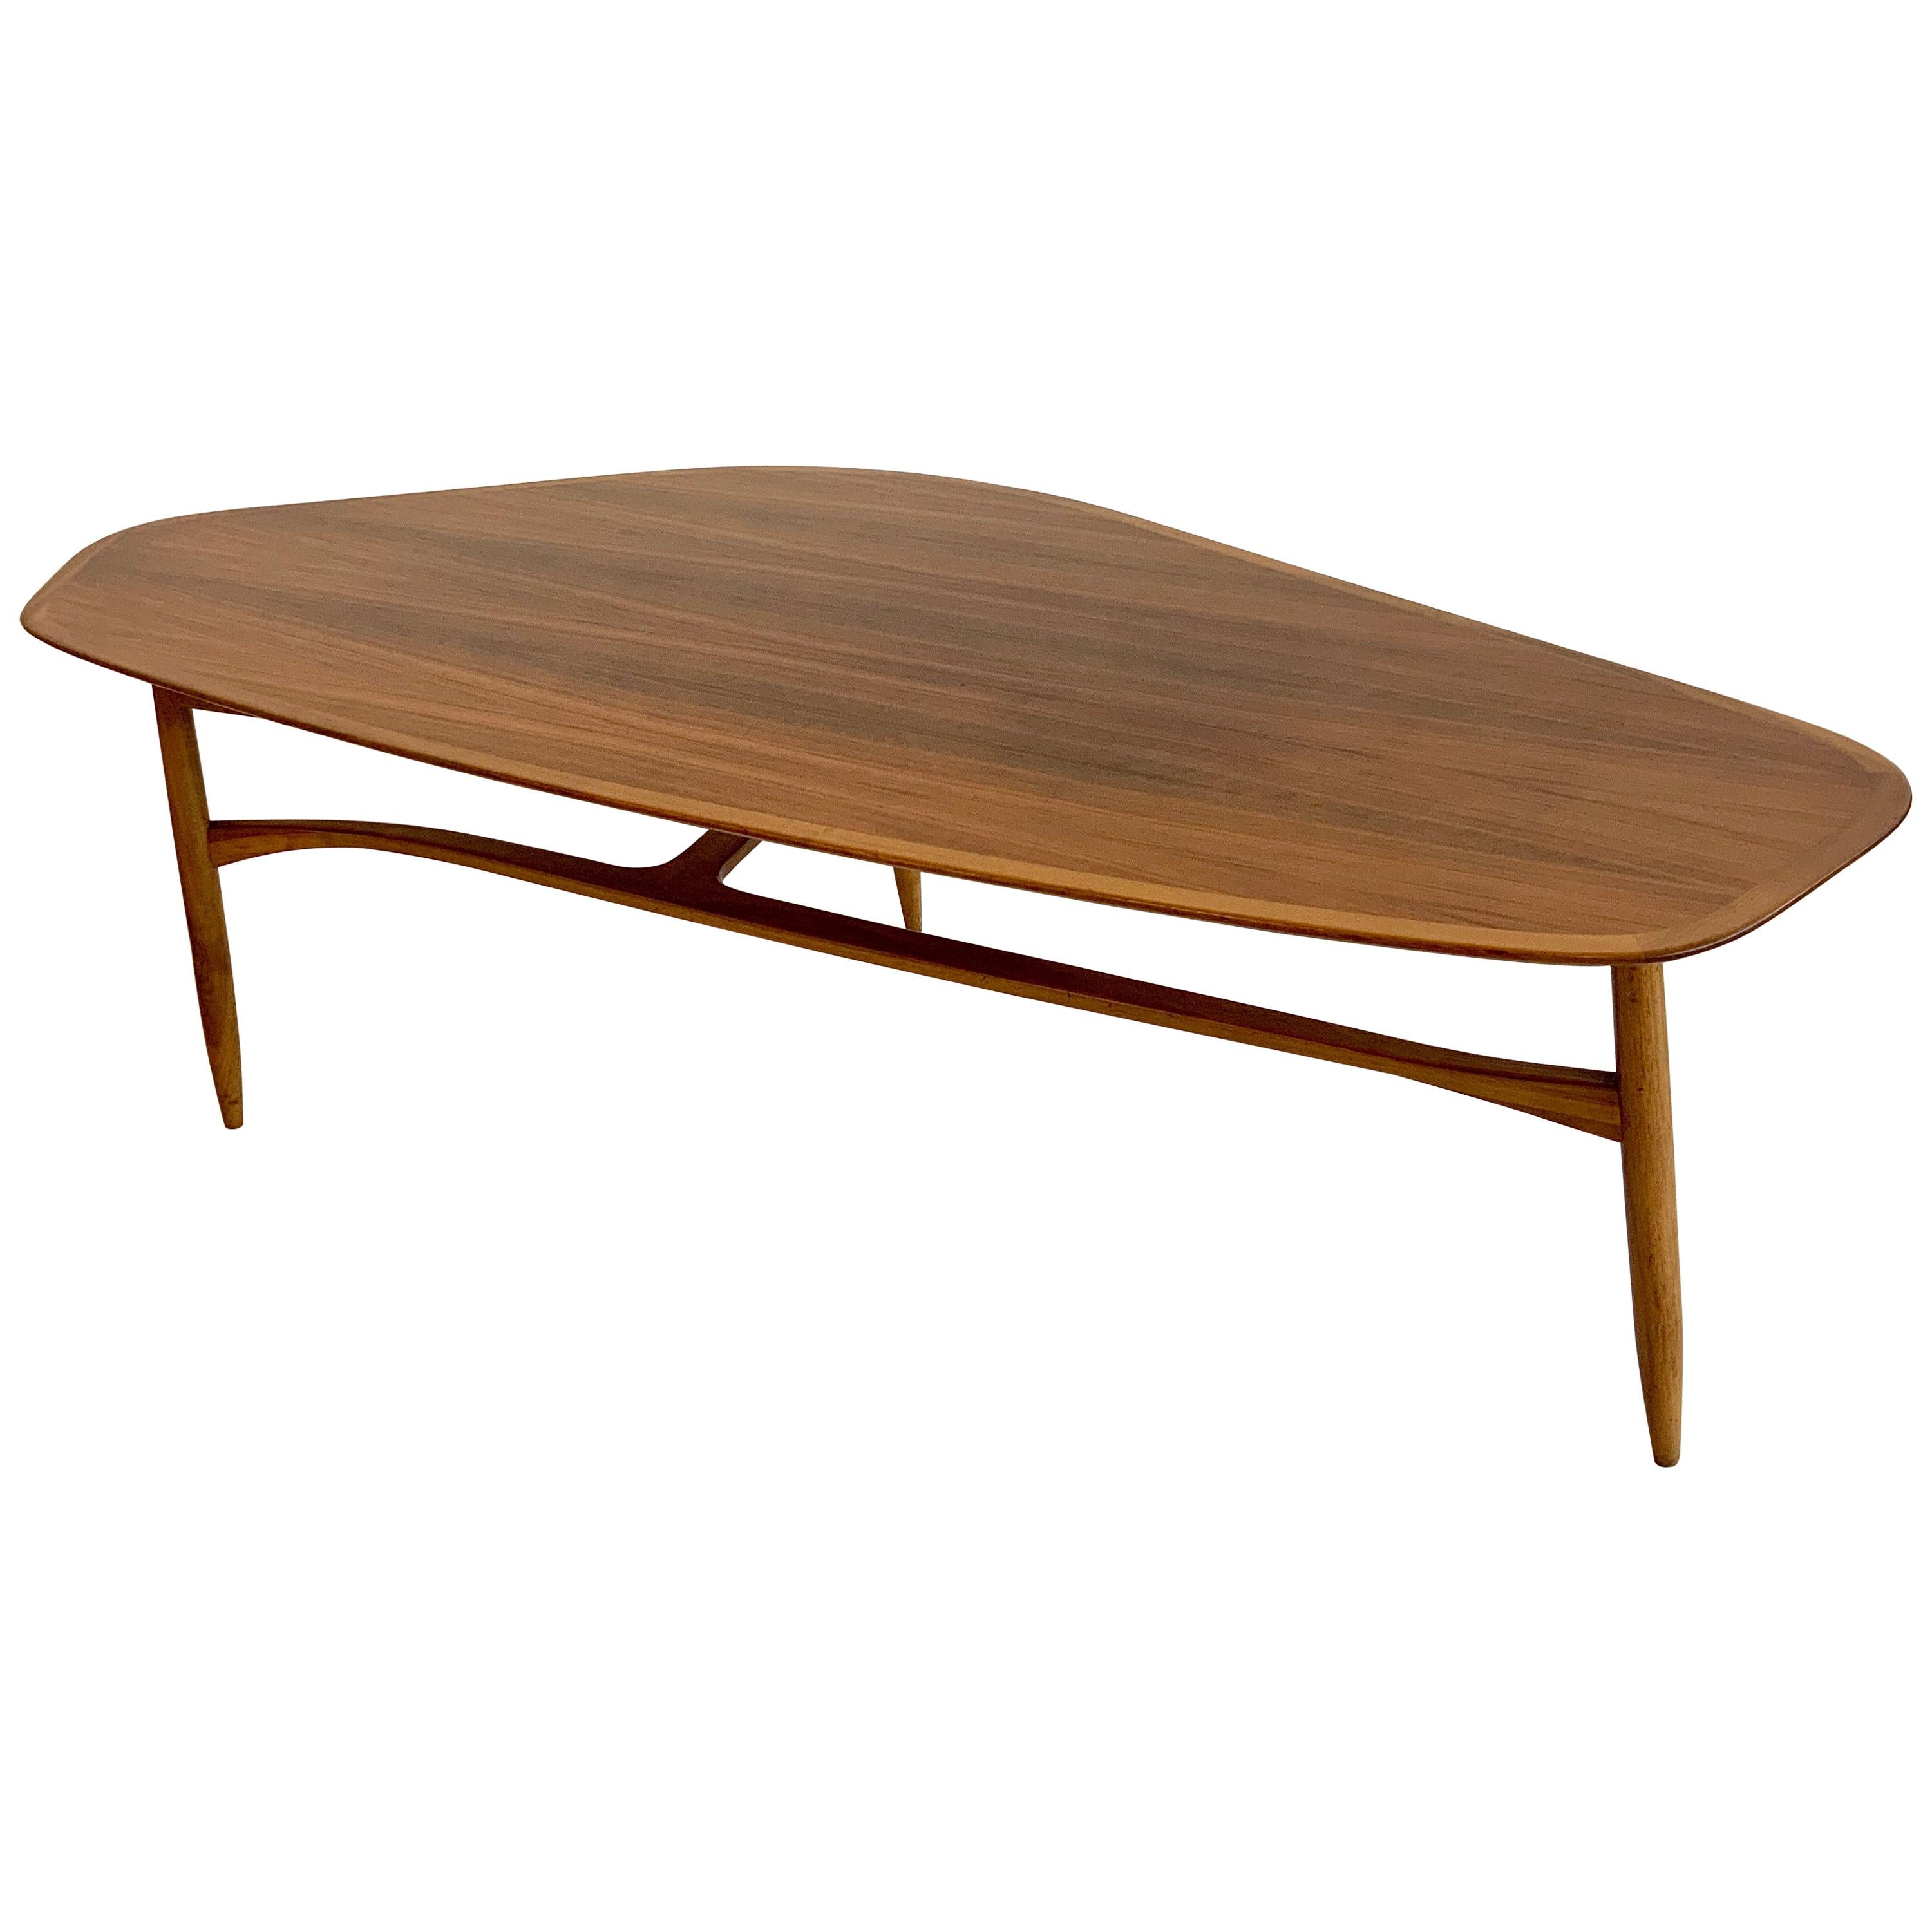 Large Svante Skogh for Laauser Midcentury Walnut Curved Coffee Table, 1950s For Sale